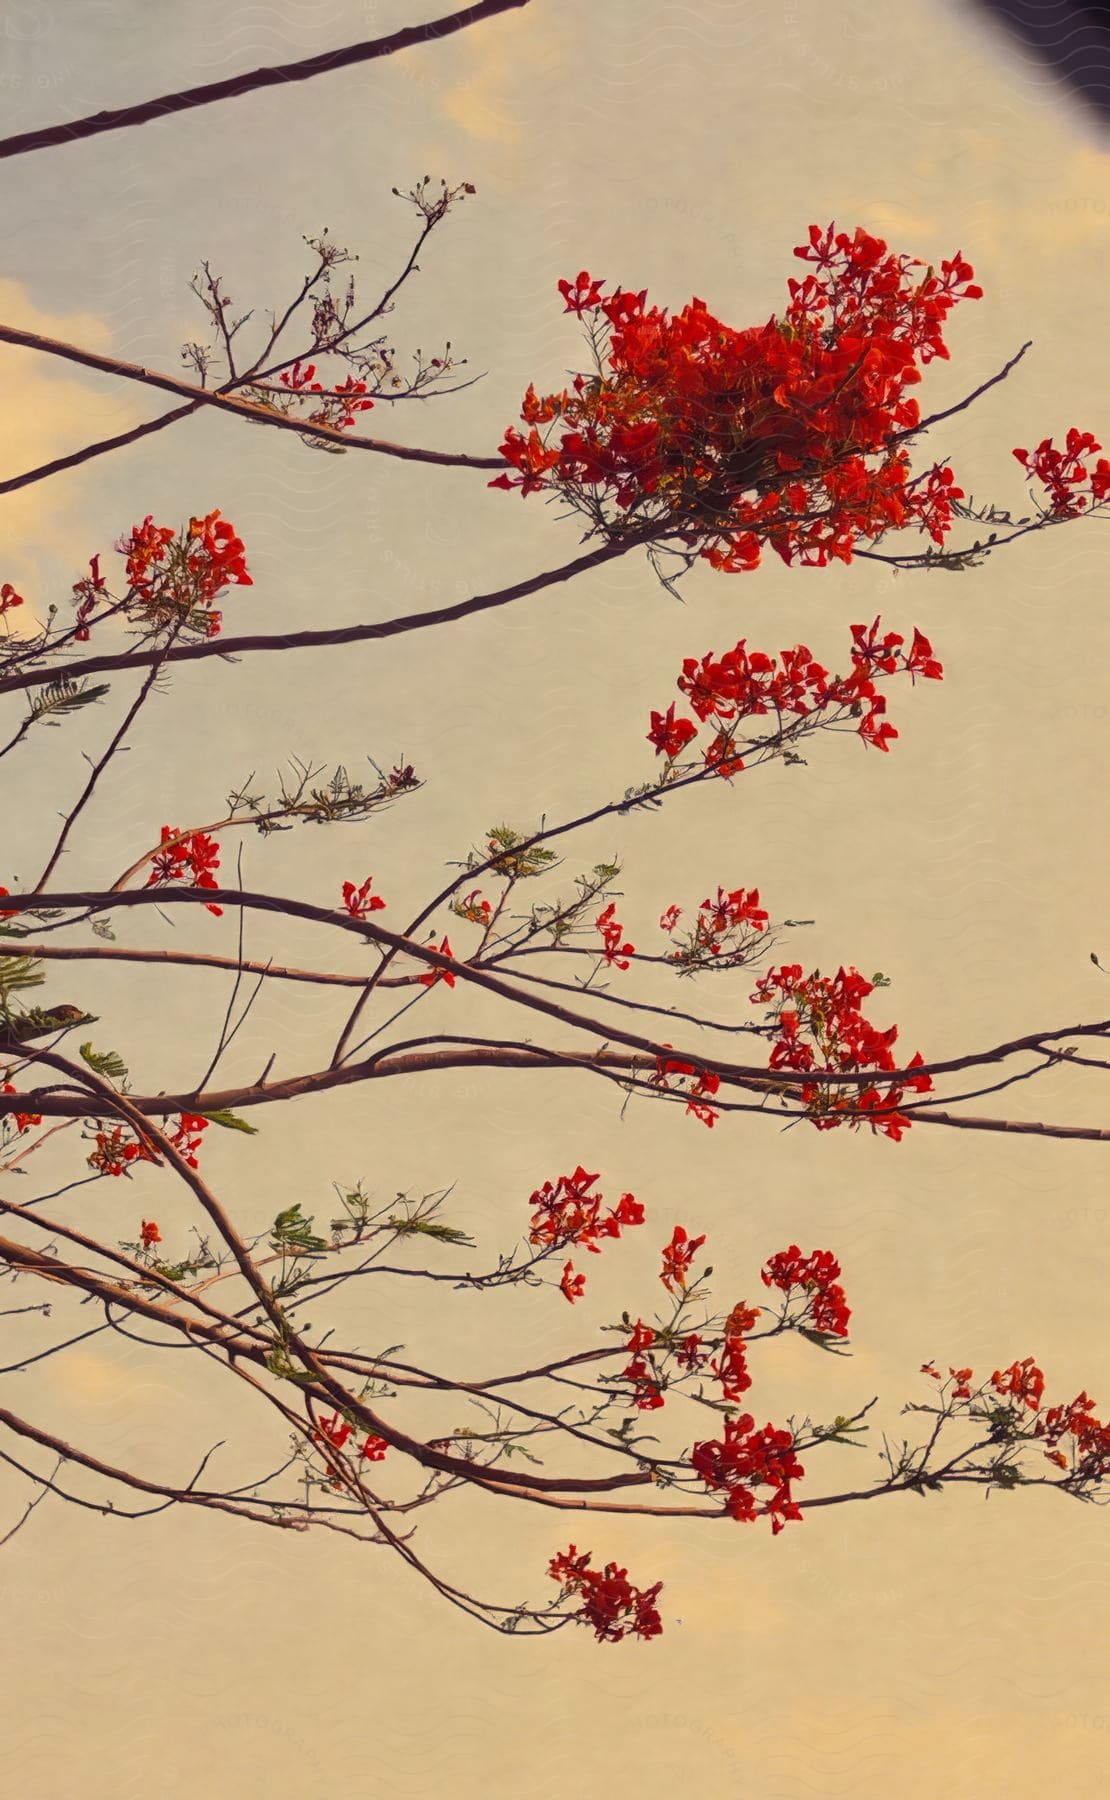 View of branches of a tree with red flowers.